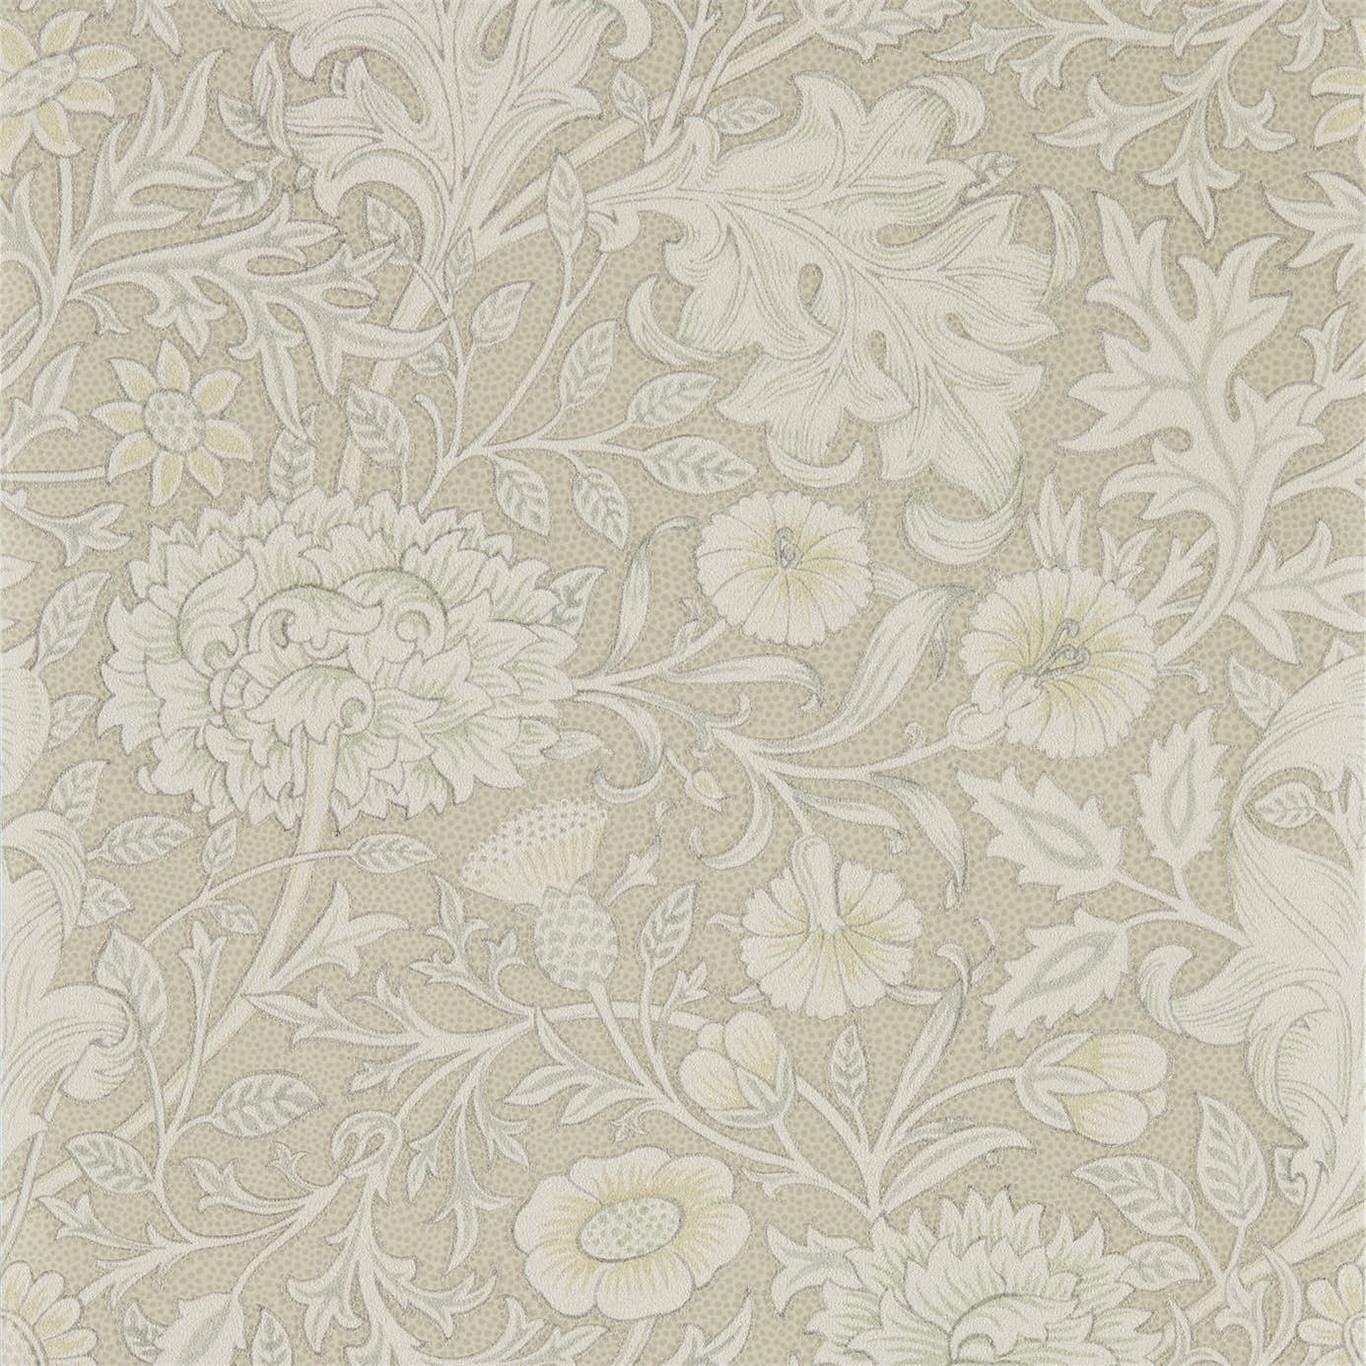 Double Bough Pewter Wallpaper DMSW216684 by Morris & Co